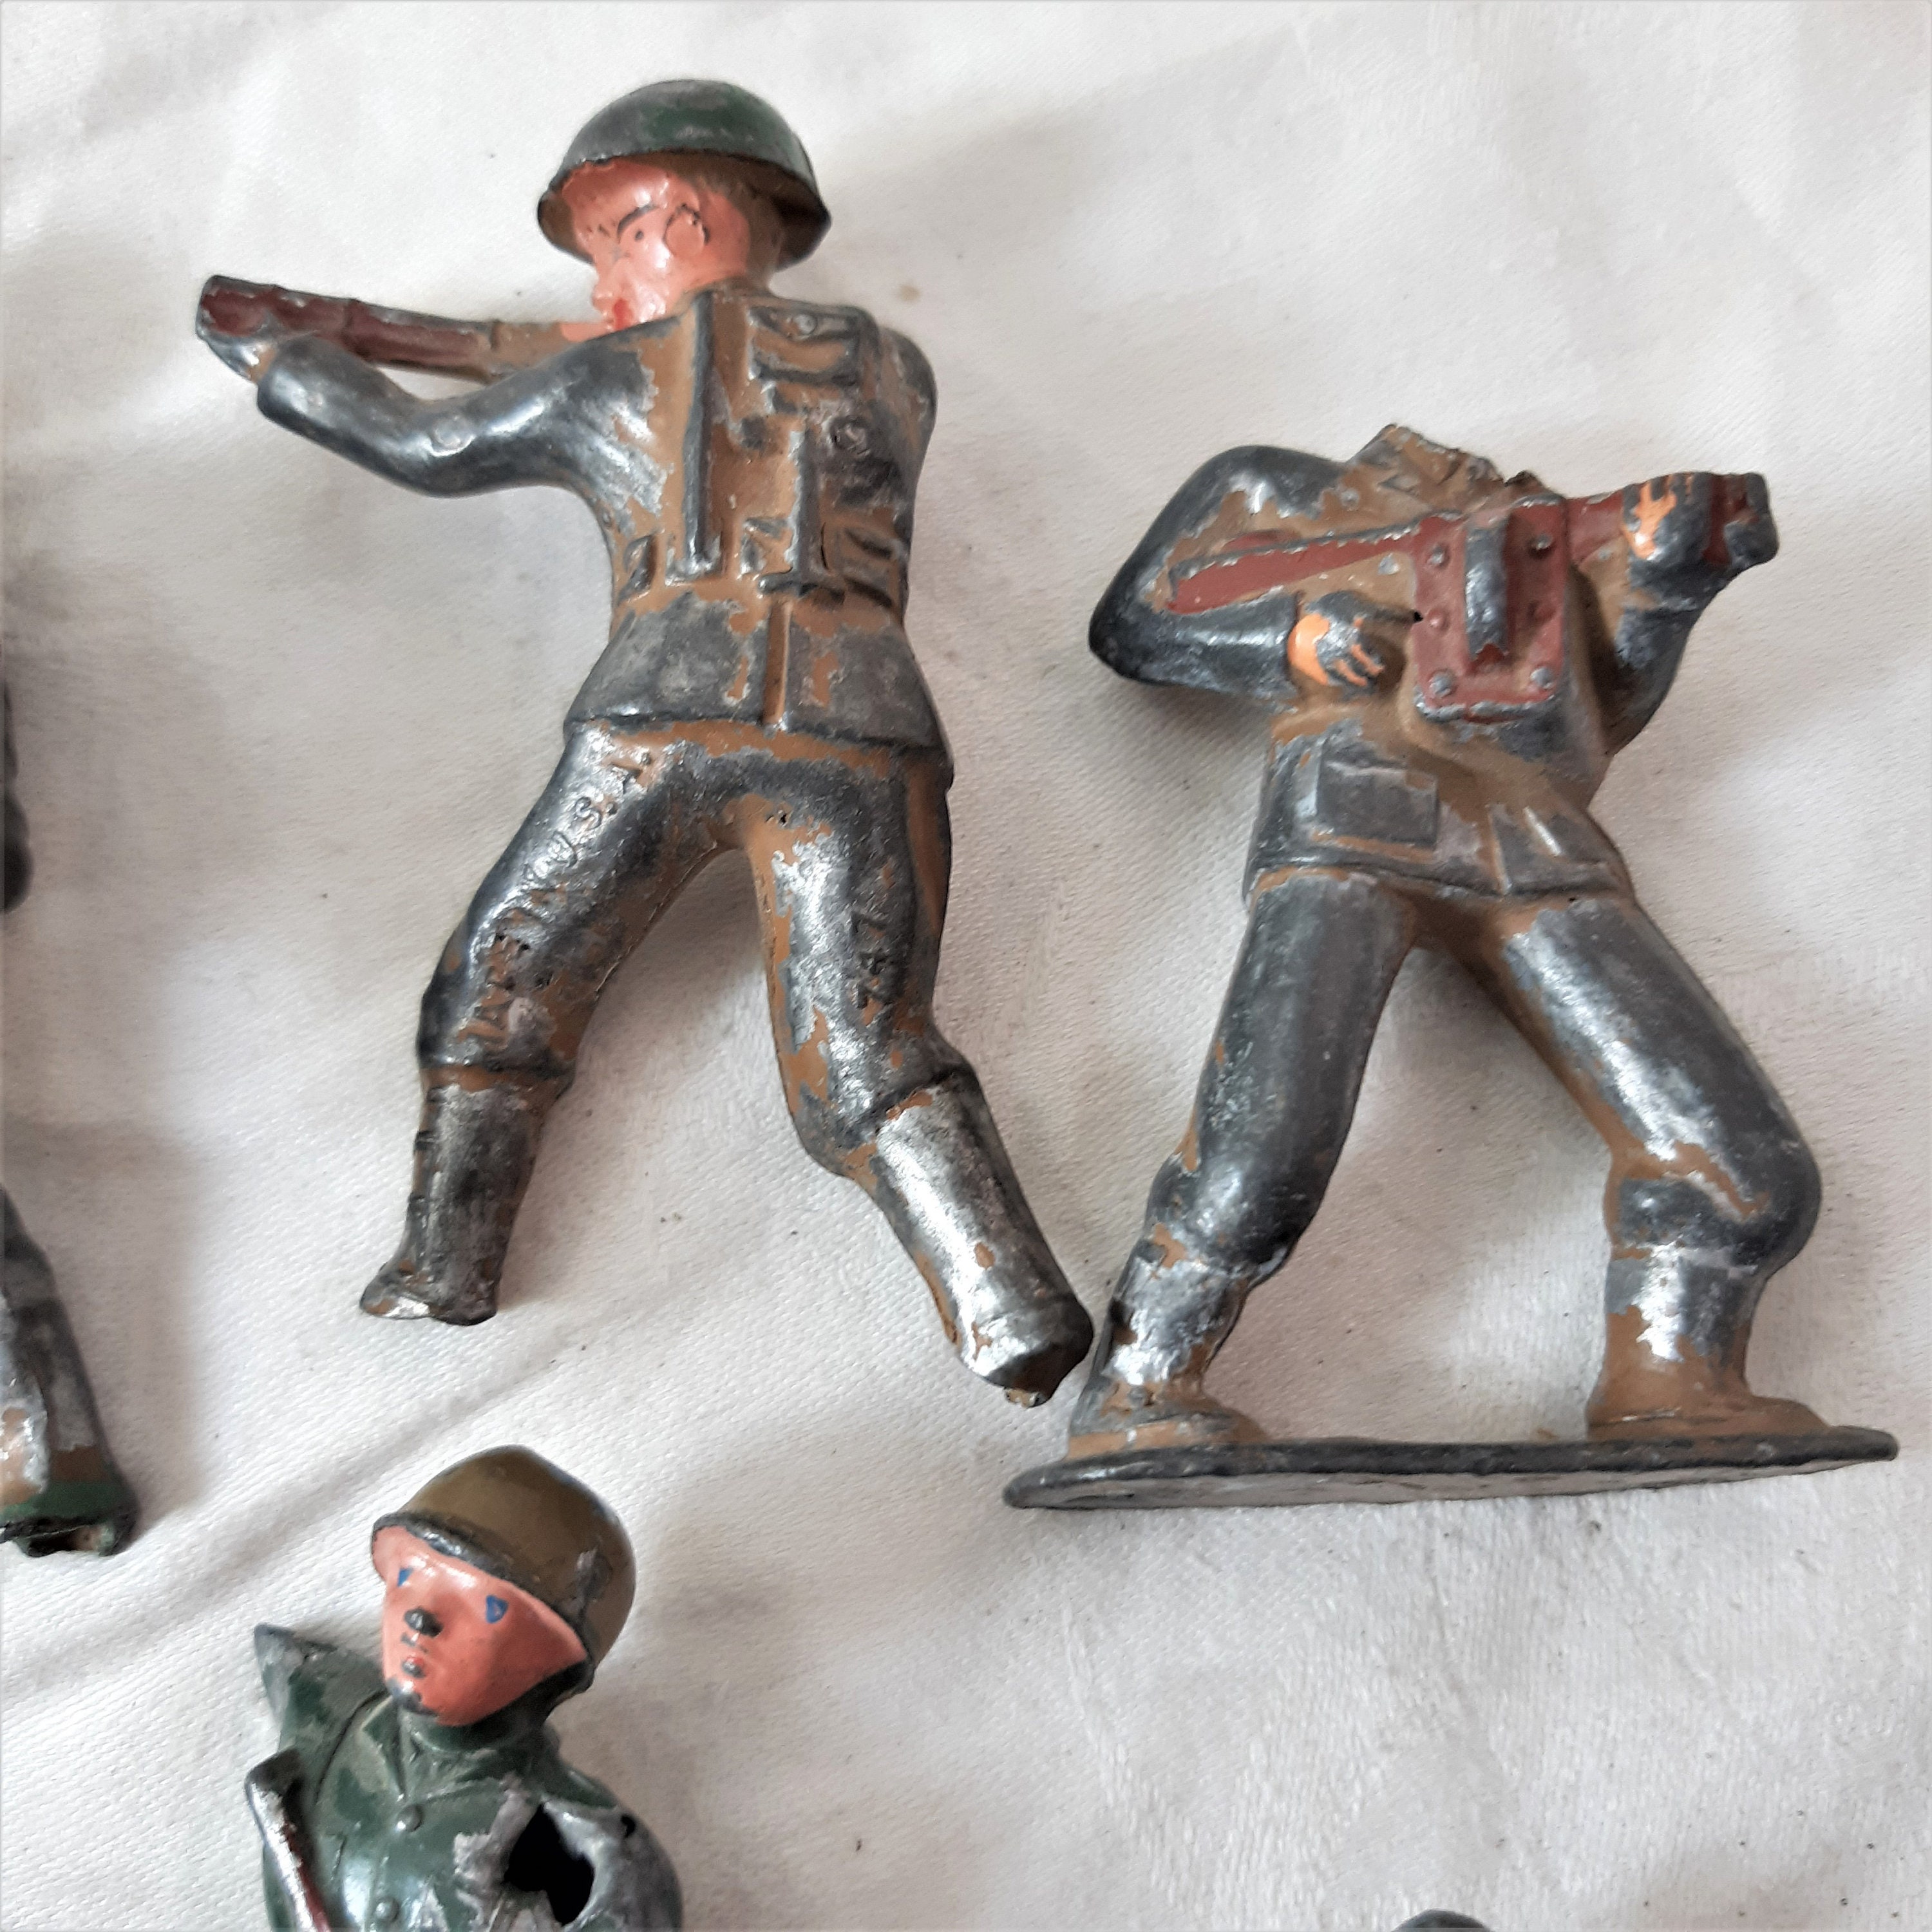 Toy lead soldier,Barbarian,detailed,handmade,carved,collectable,rare toy,gift 